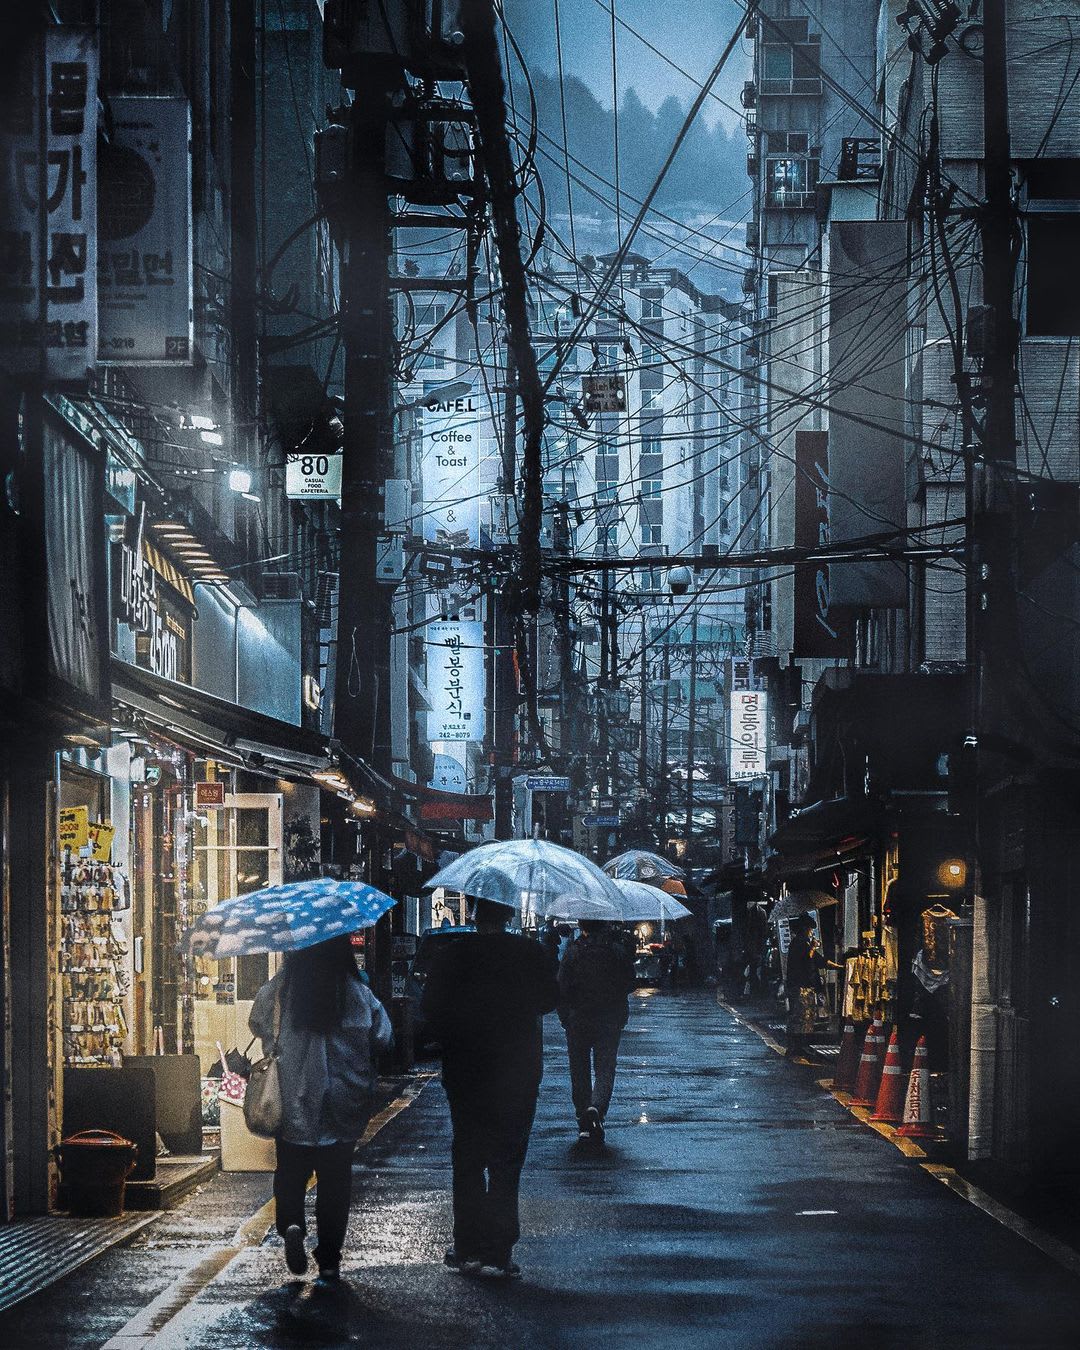 Rain drenched street with messy overhead cables, Busan, South Korea.